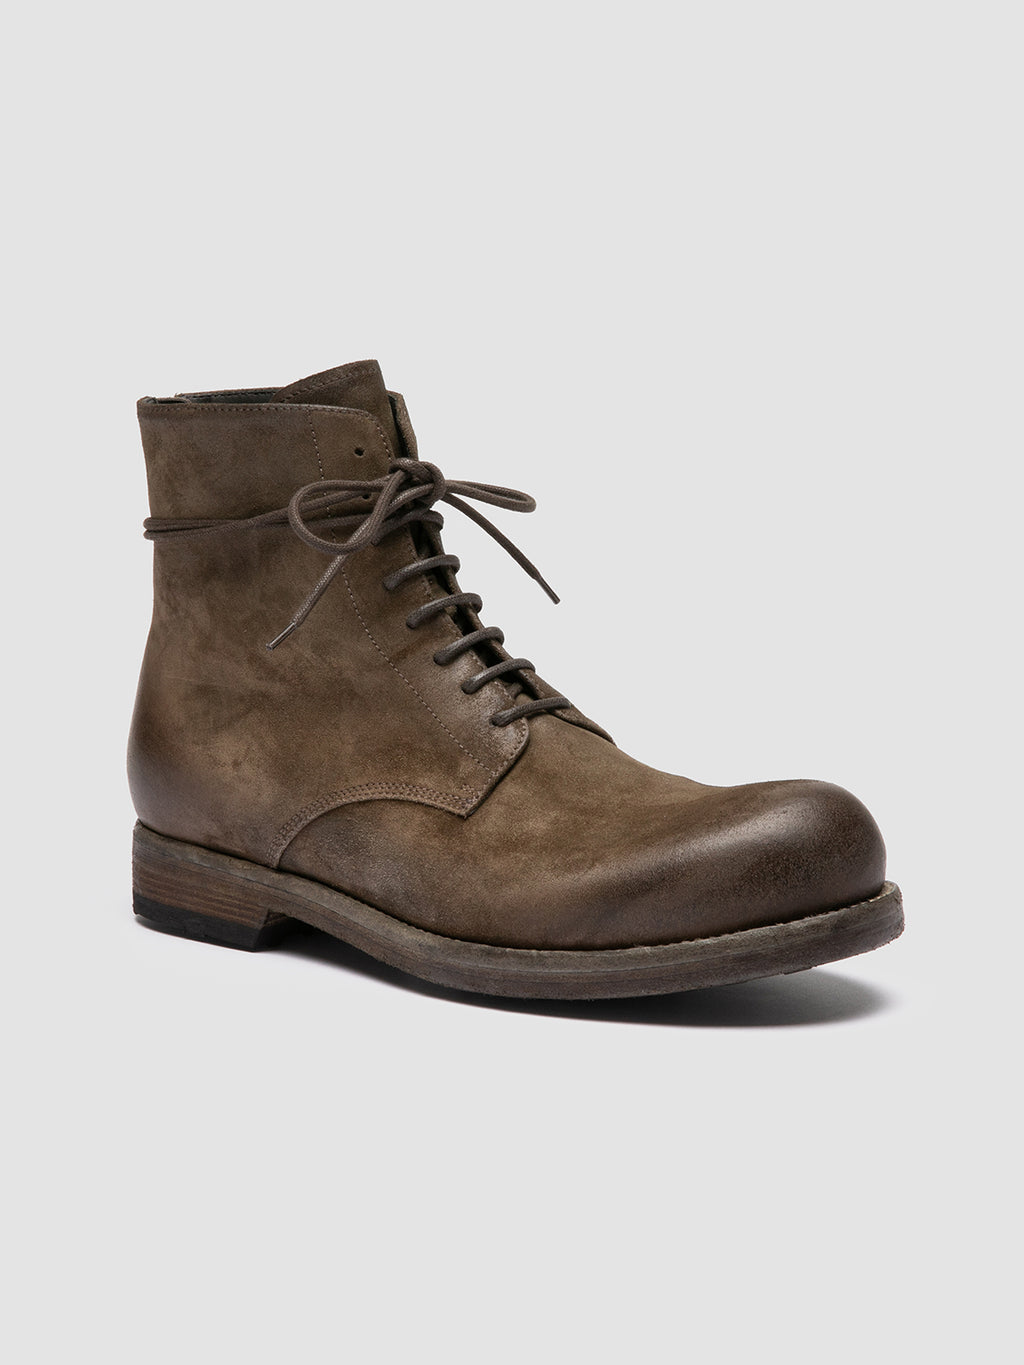 BULLA DD 102 - Green Suede Lace-up Boots Men Officine Creative - 3